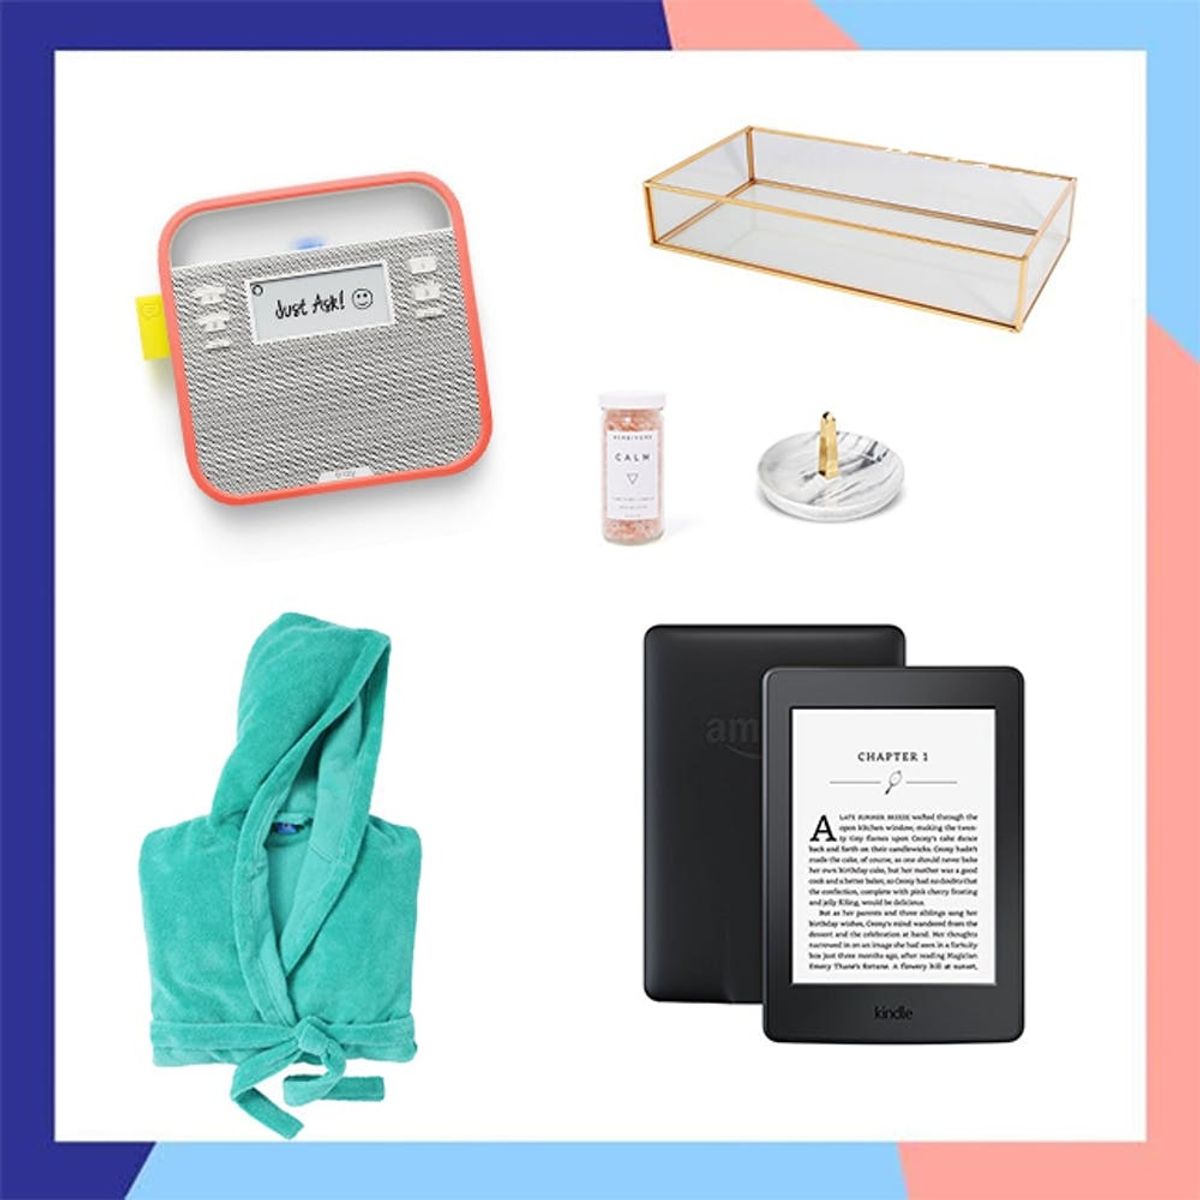 25 Bathtime Essentials You Need for National Read in the Bathtub Day